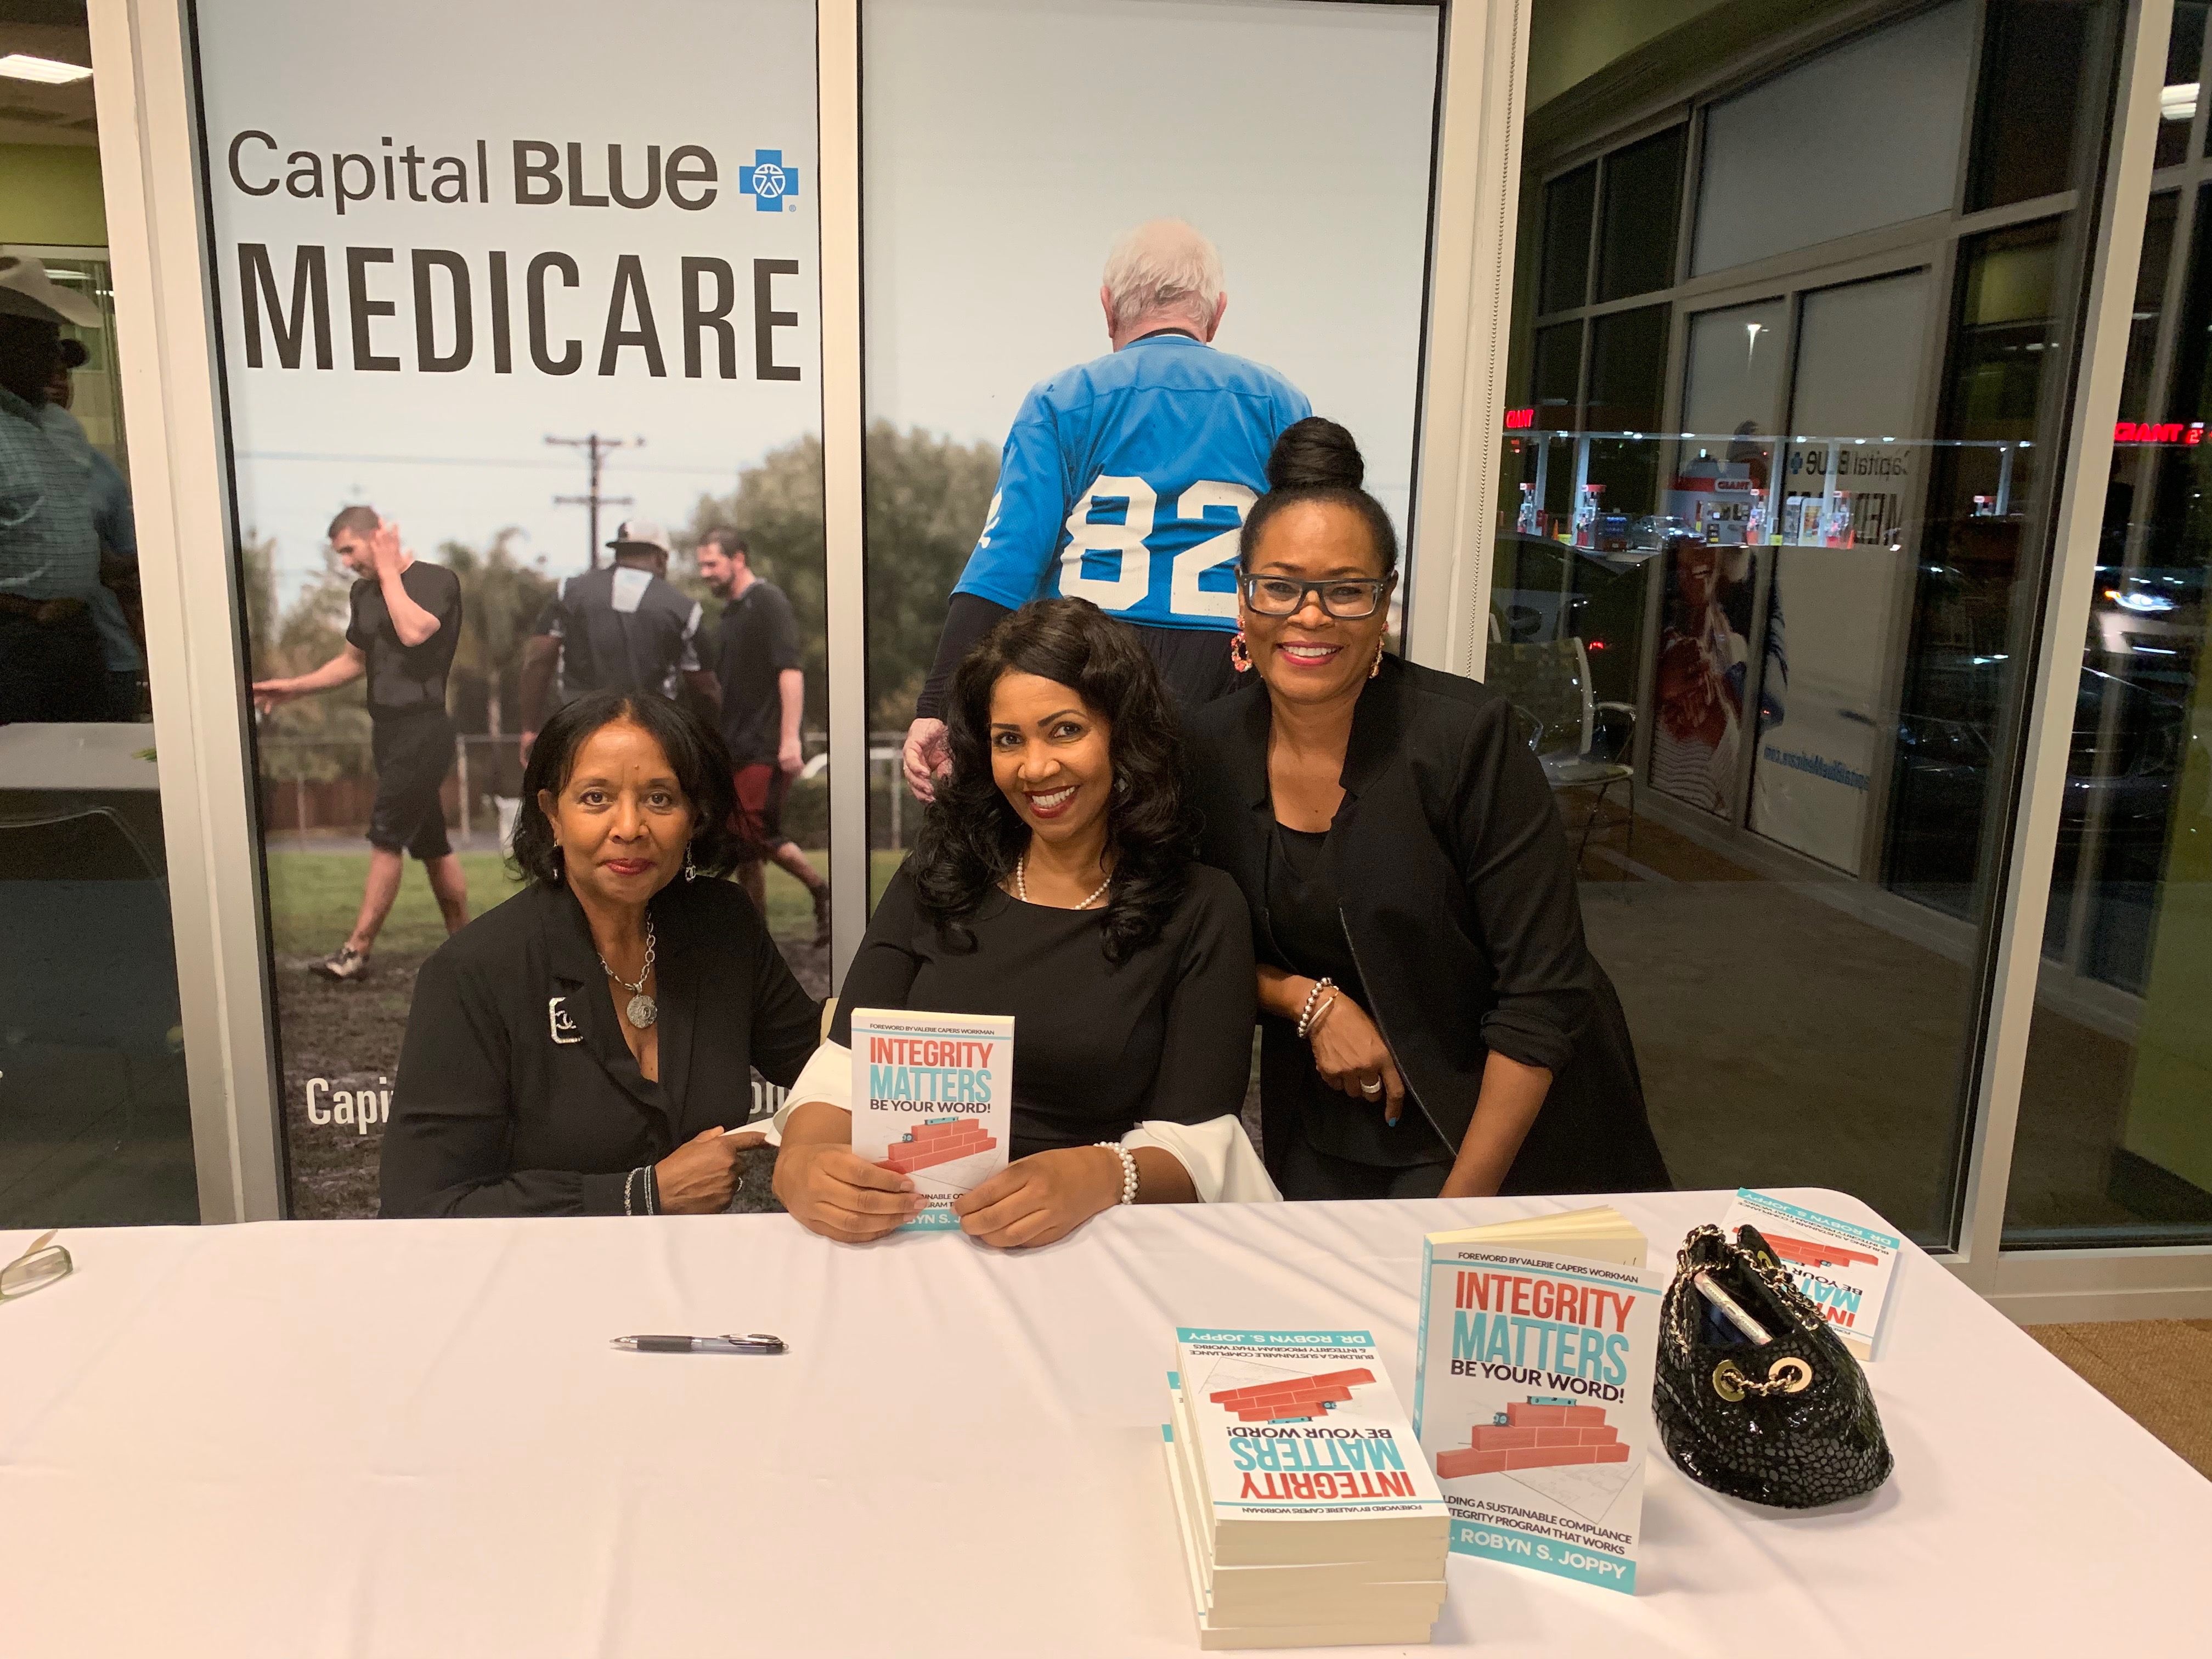 Harrisburg, PA Blogger, The Age of Grace, Eugenia Russell Hargrove with author, Dr. Robyn S. Joppy at her launch party and book signing event at Capital Blue Cross.